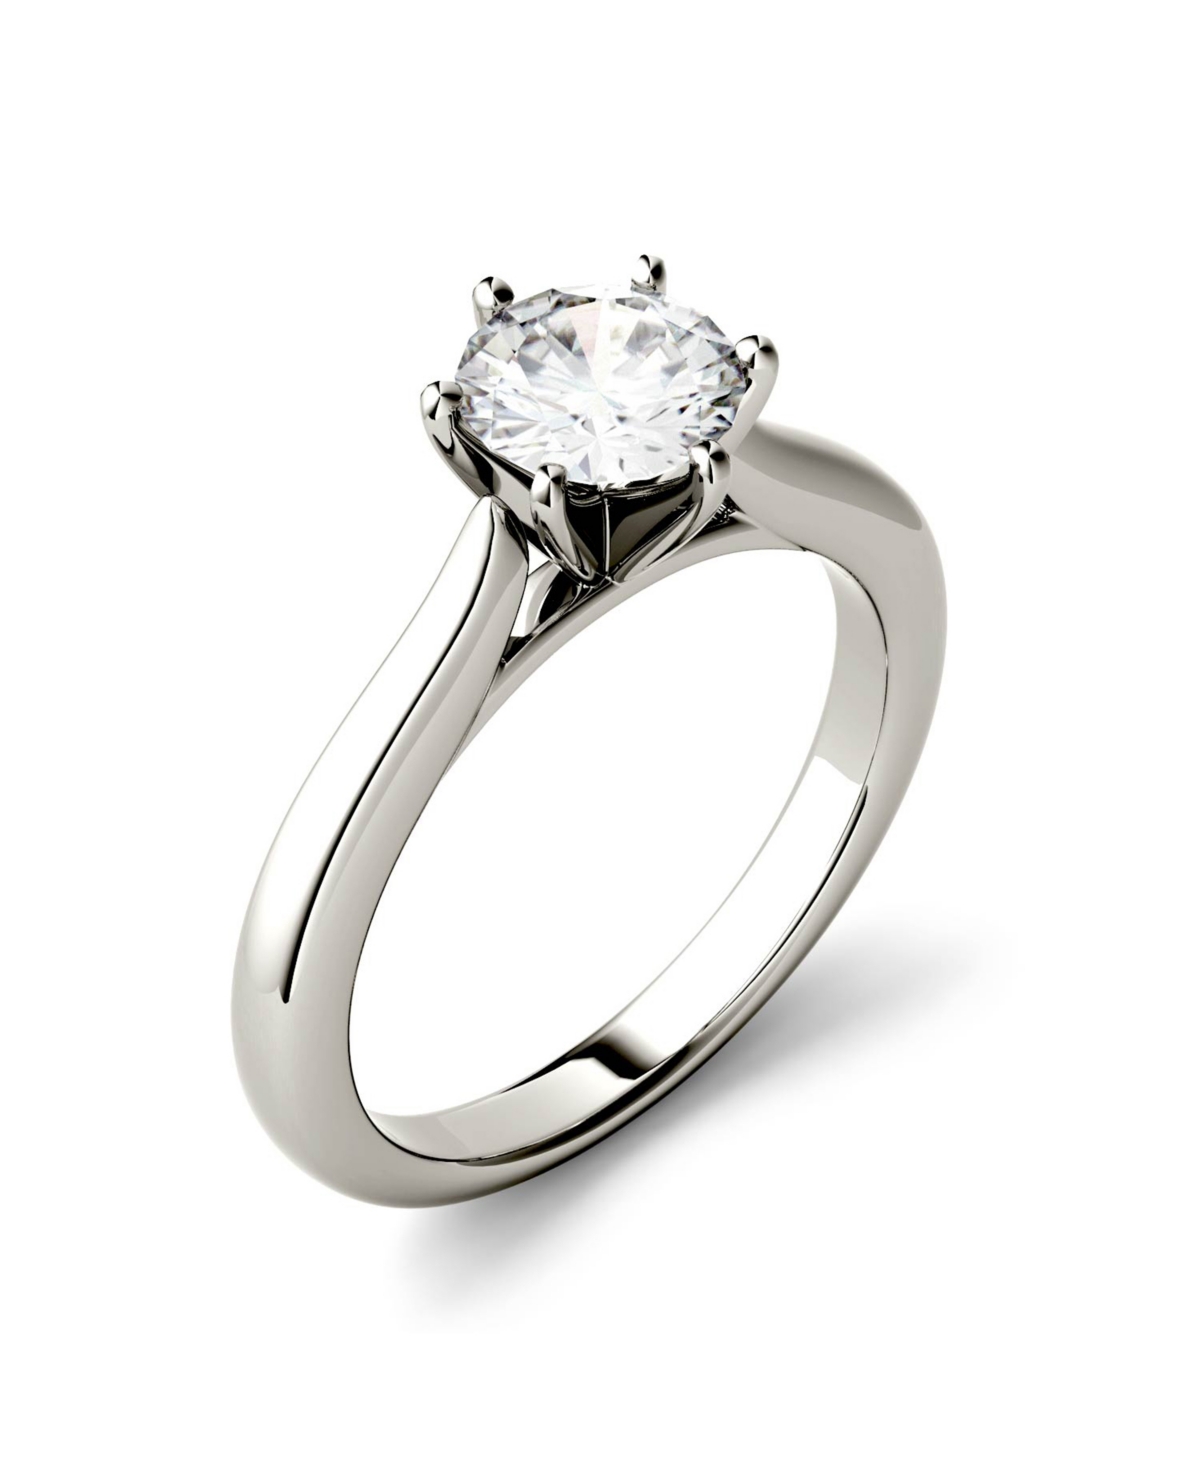 Moissanite Solitaire Engagement Ring 1 ct. t.w. Diamond Equivalent in 14k White Gold or 14k Yellow Gold - White Gold